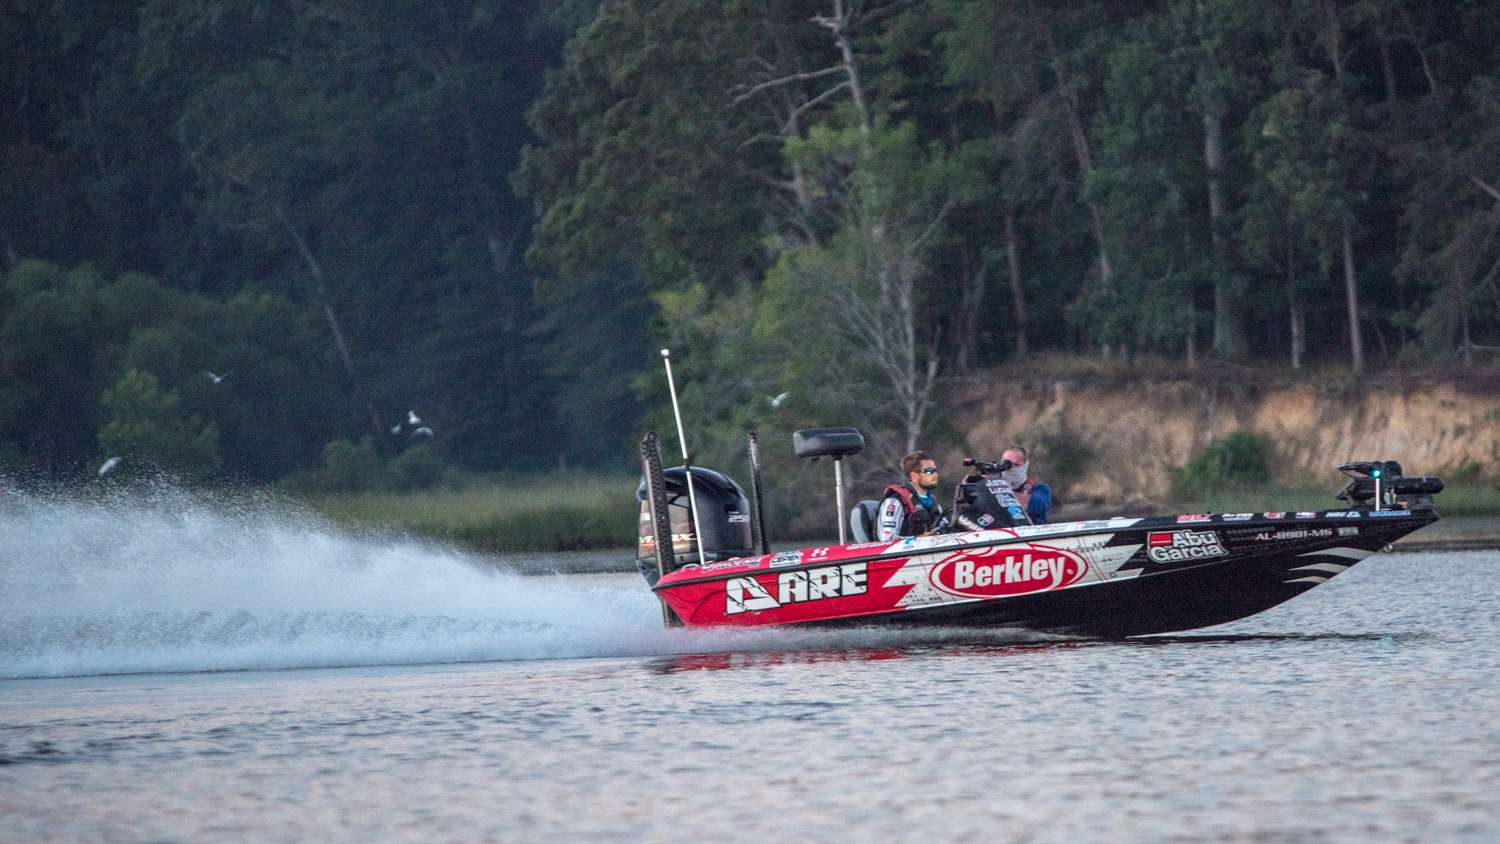 At 6:15 Justin Lucas puts the hammer down and heads out in search of another monster bag. 